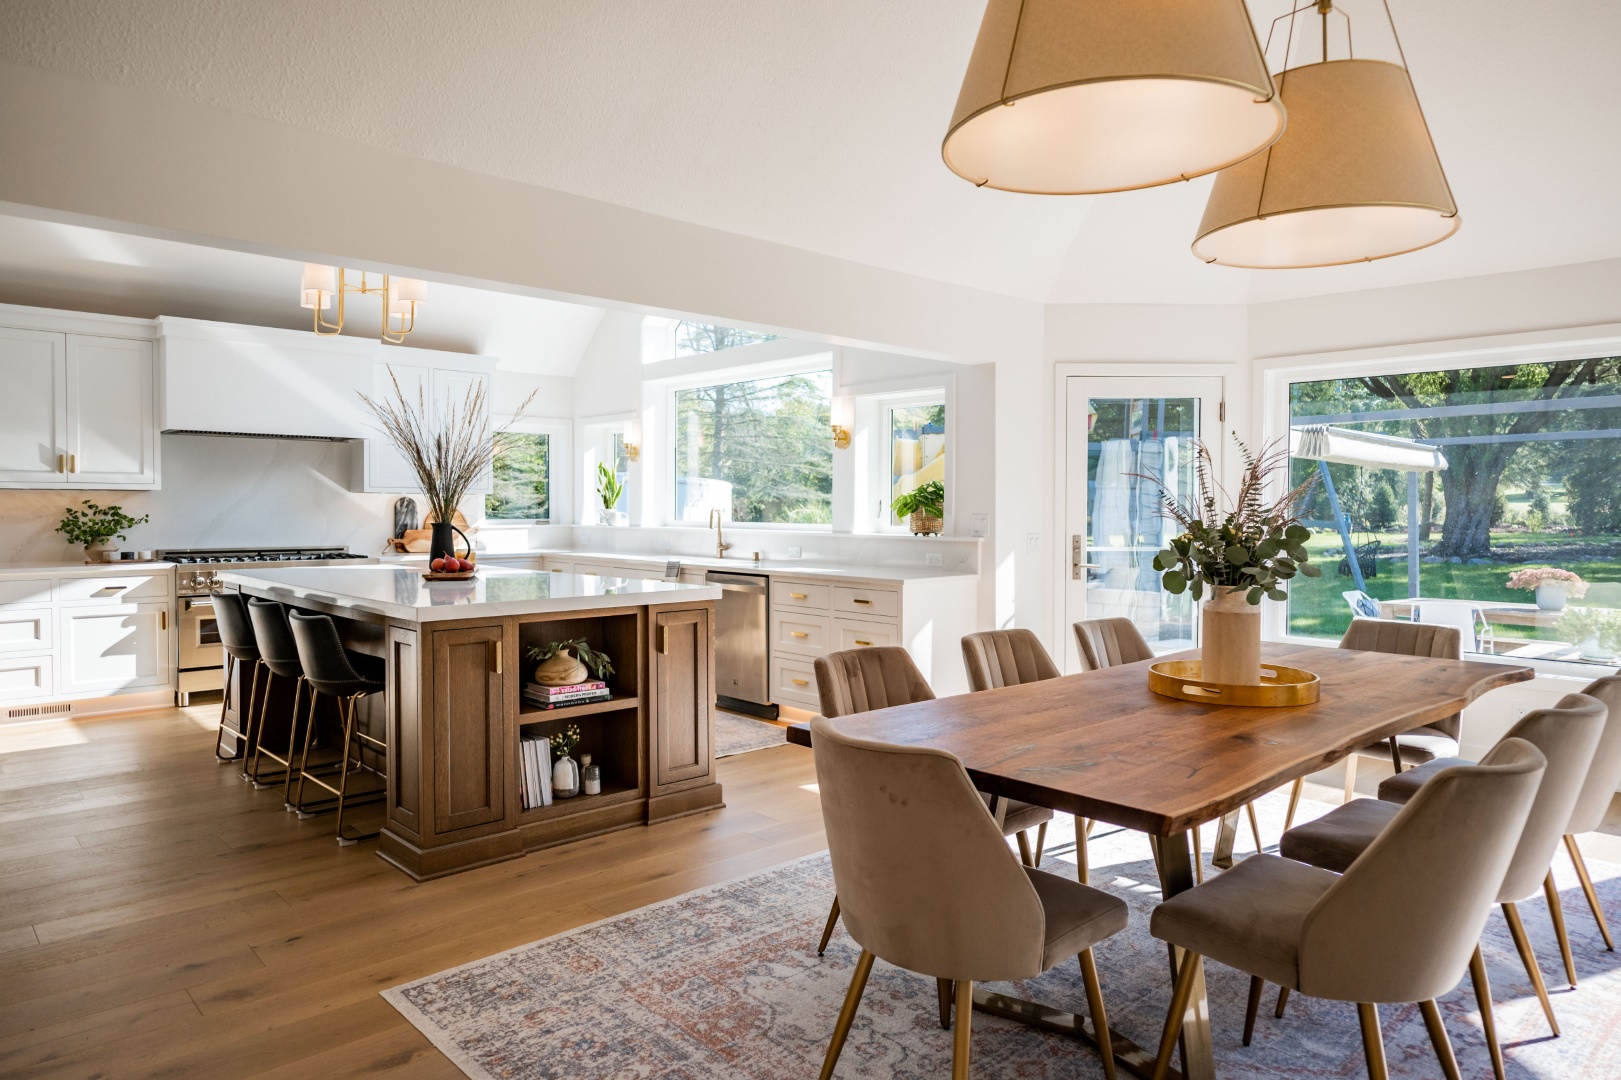 The Best of Both Worlds: 16 Transitional Dining Room Designs for a Chic Look